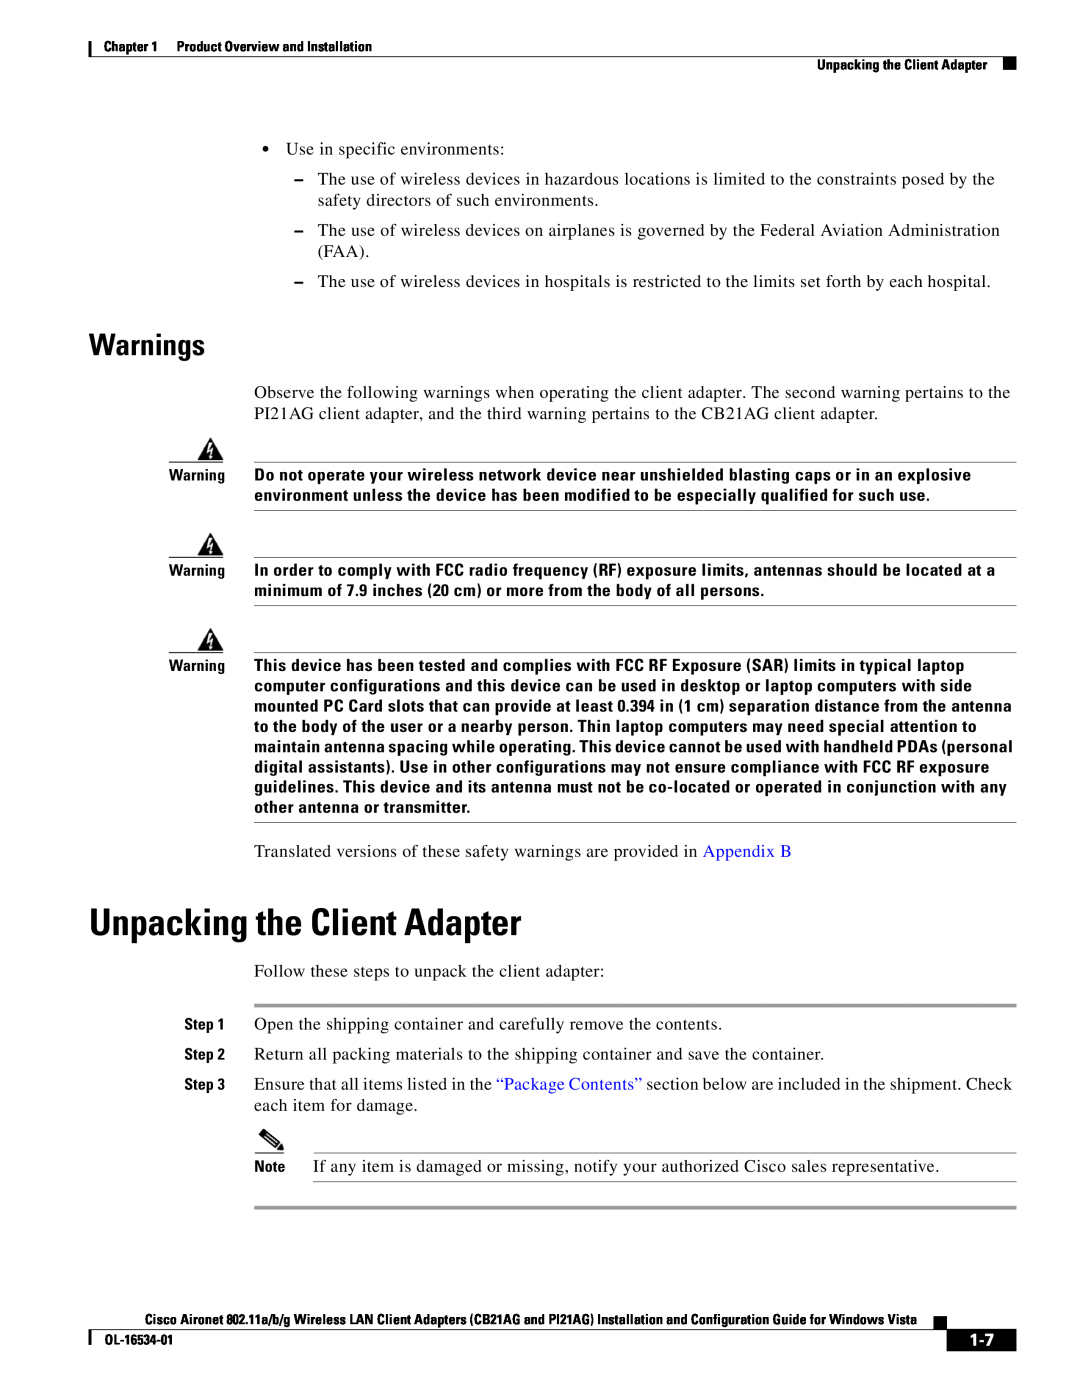 Cisco Systems CB21AG, PI21AG manual Unpacking the Client Adapter, Warnings 